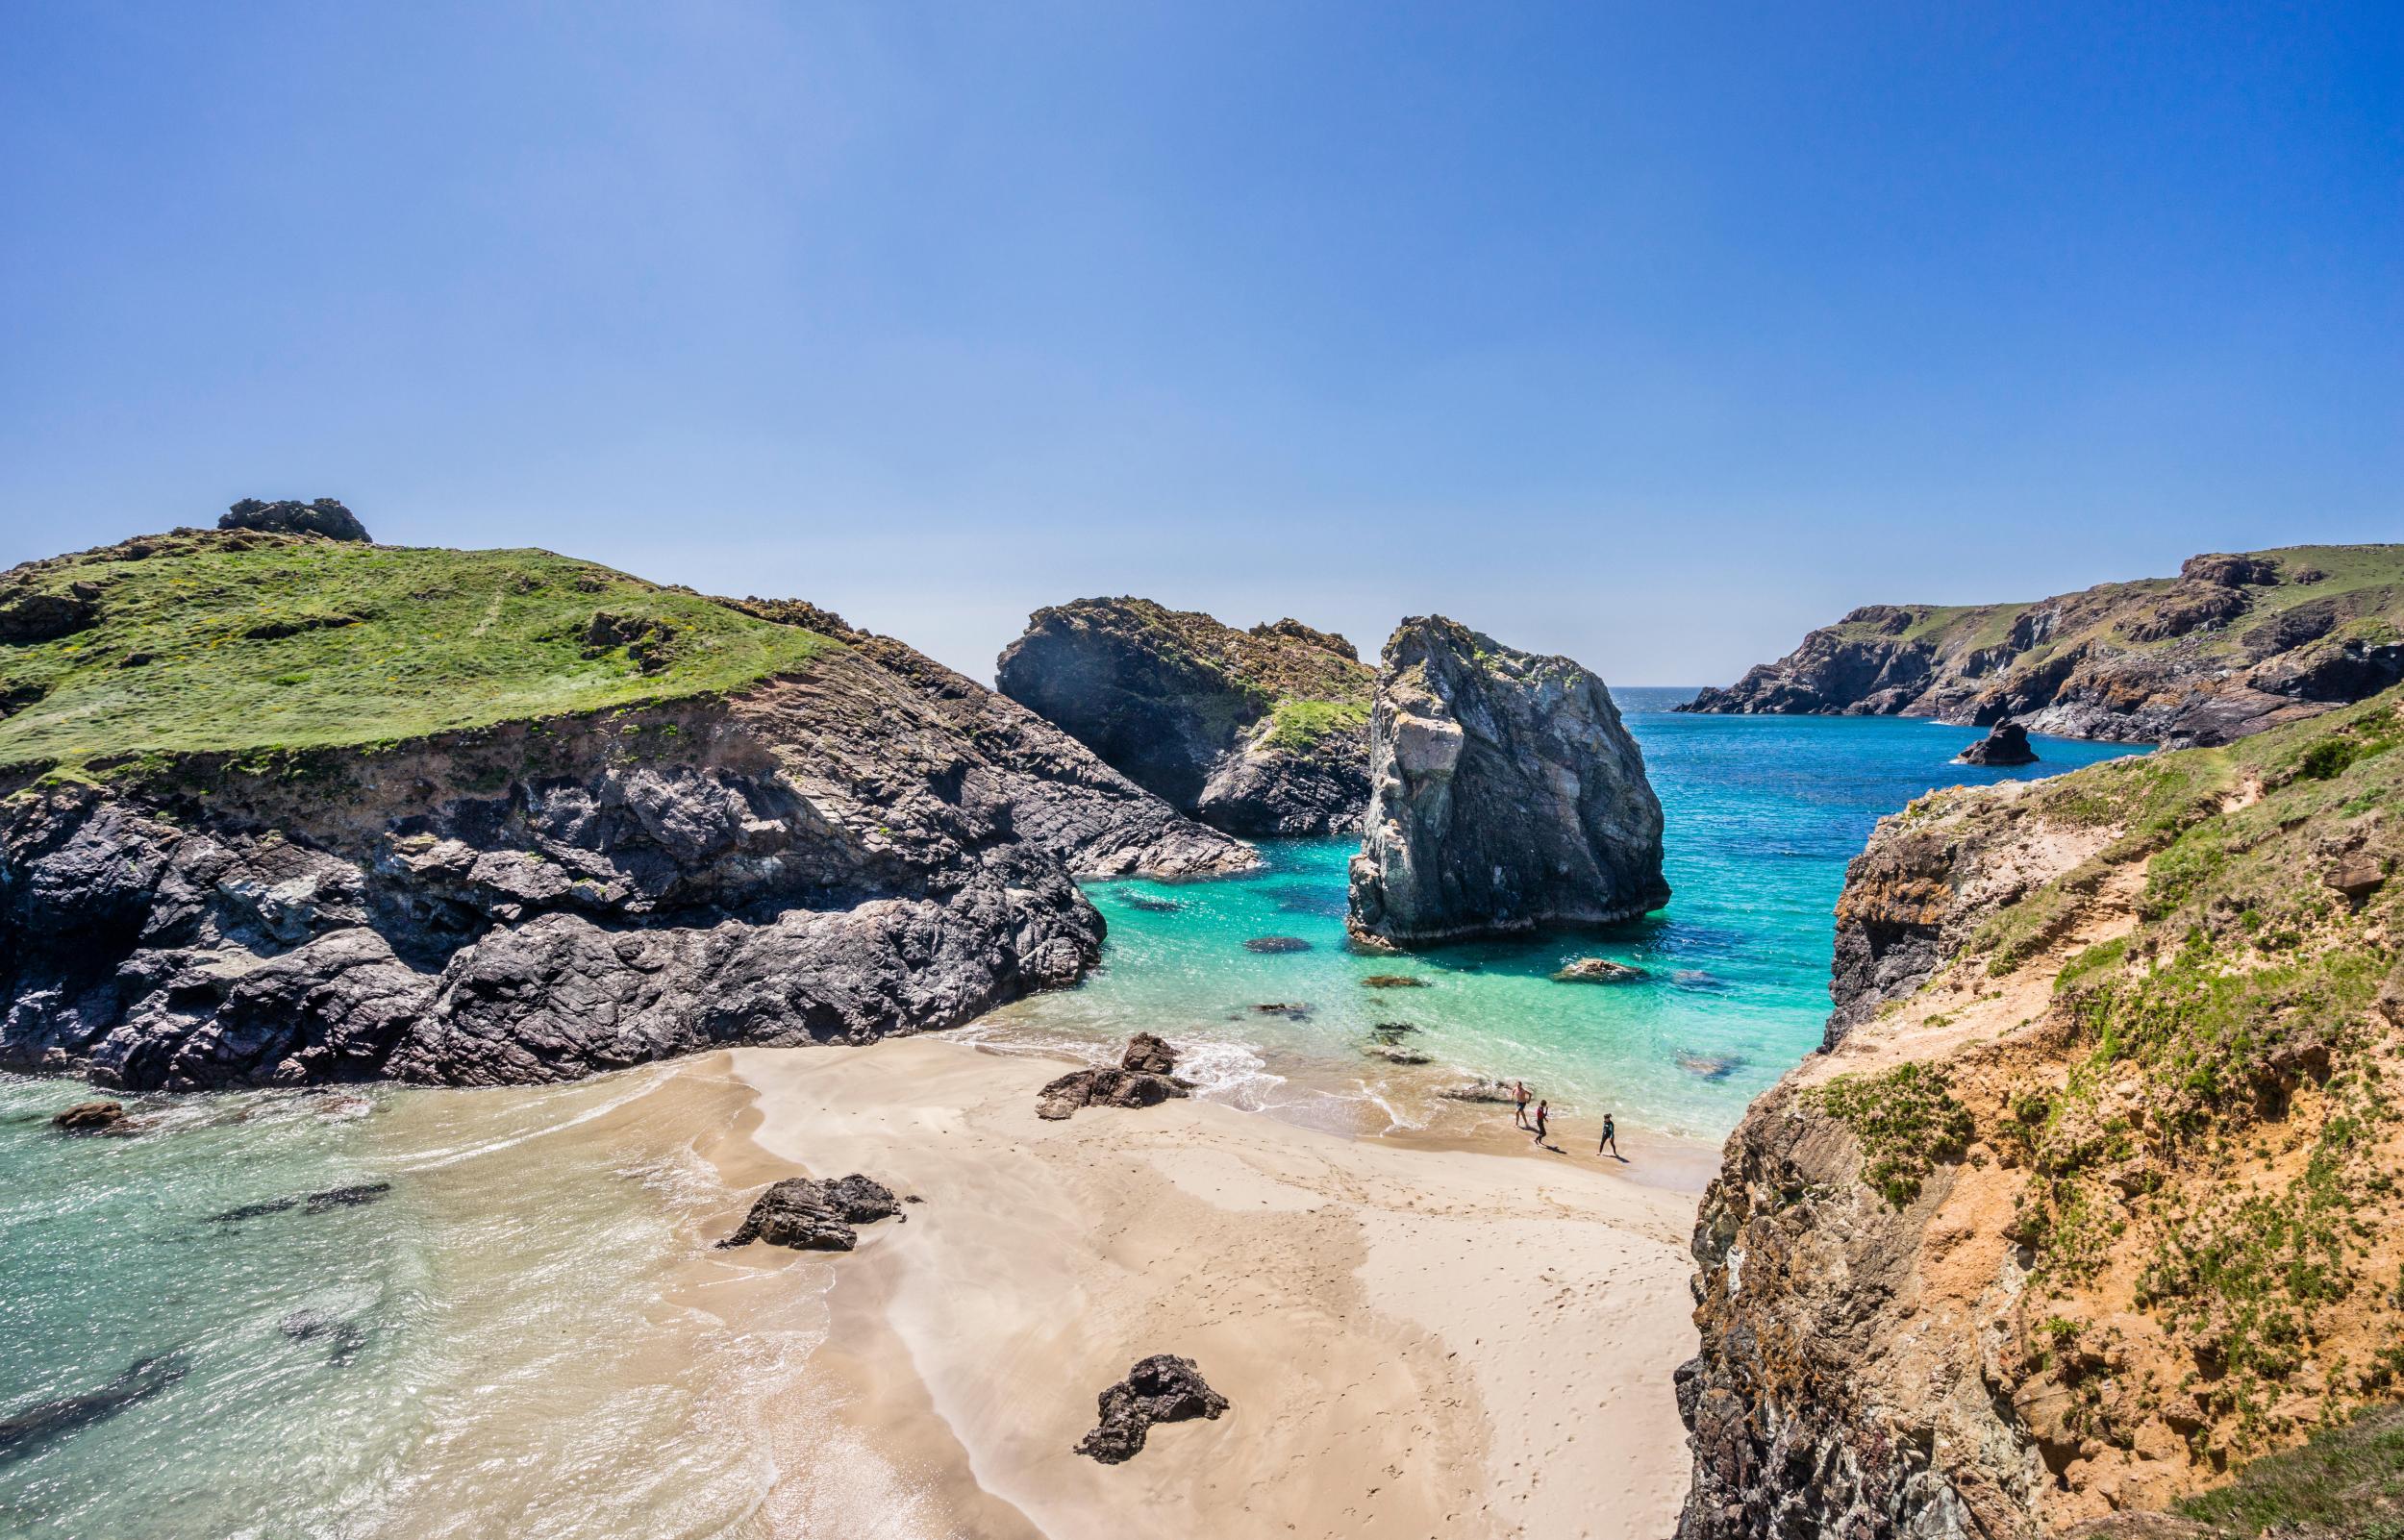 Kynance Cove in Cornwall has attracted many more visitors than usual this summer